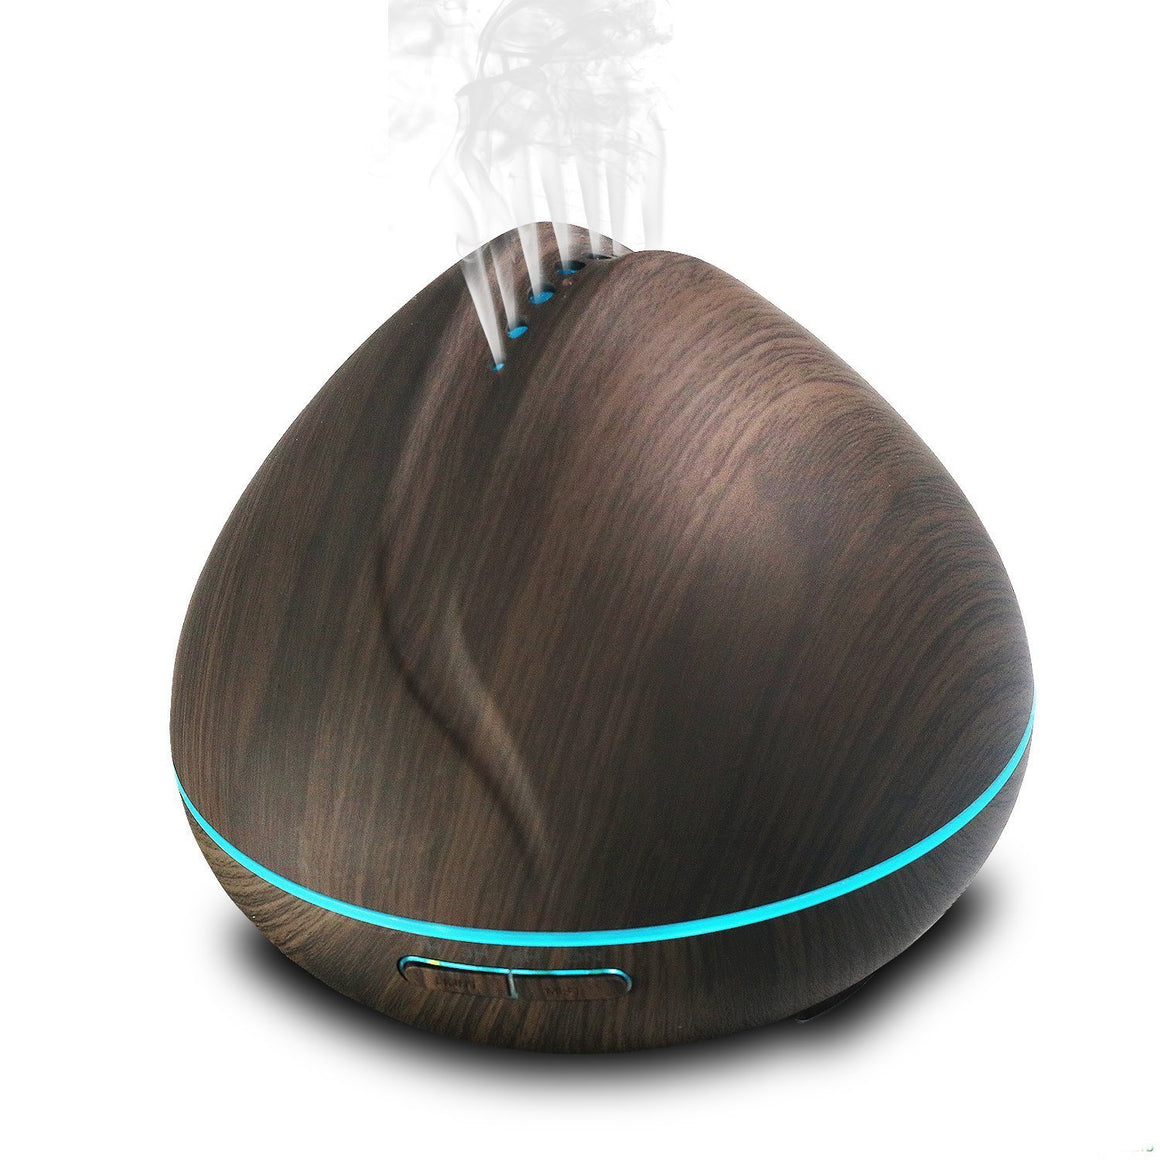 light wood textured essential oil diffuser